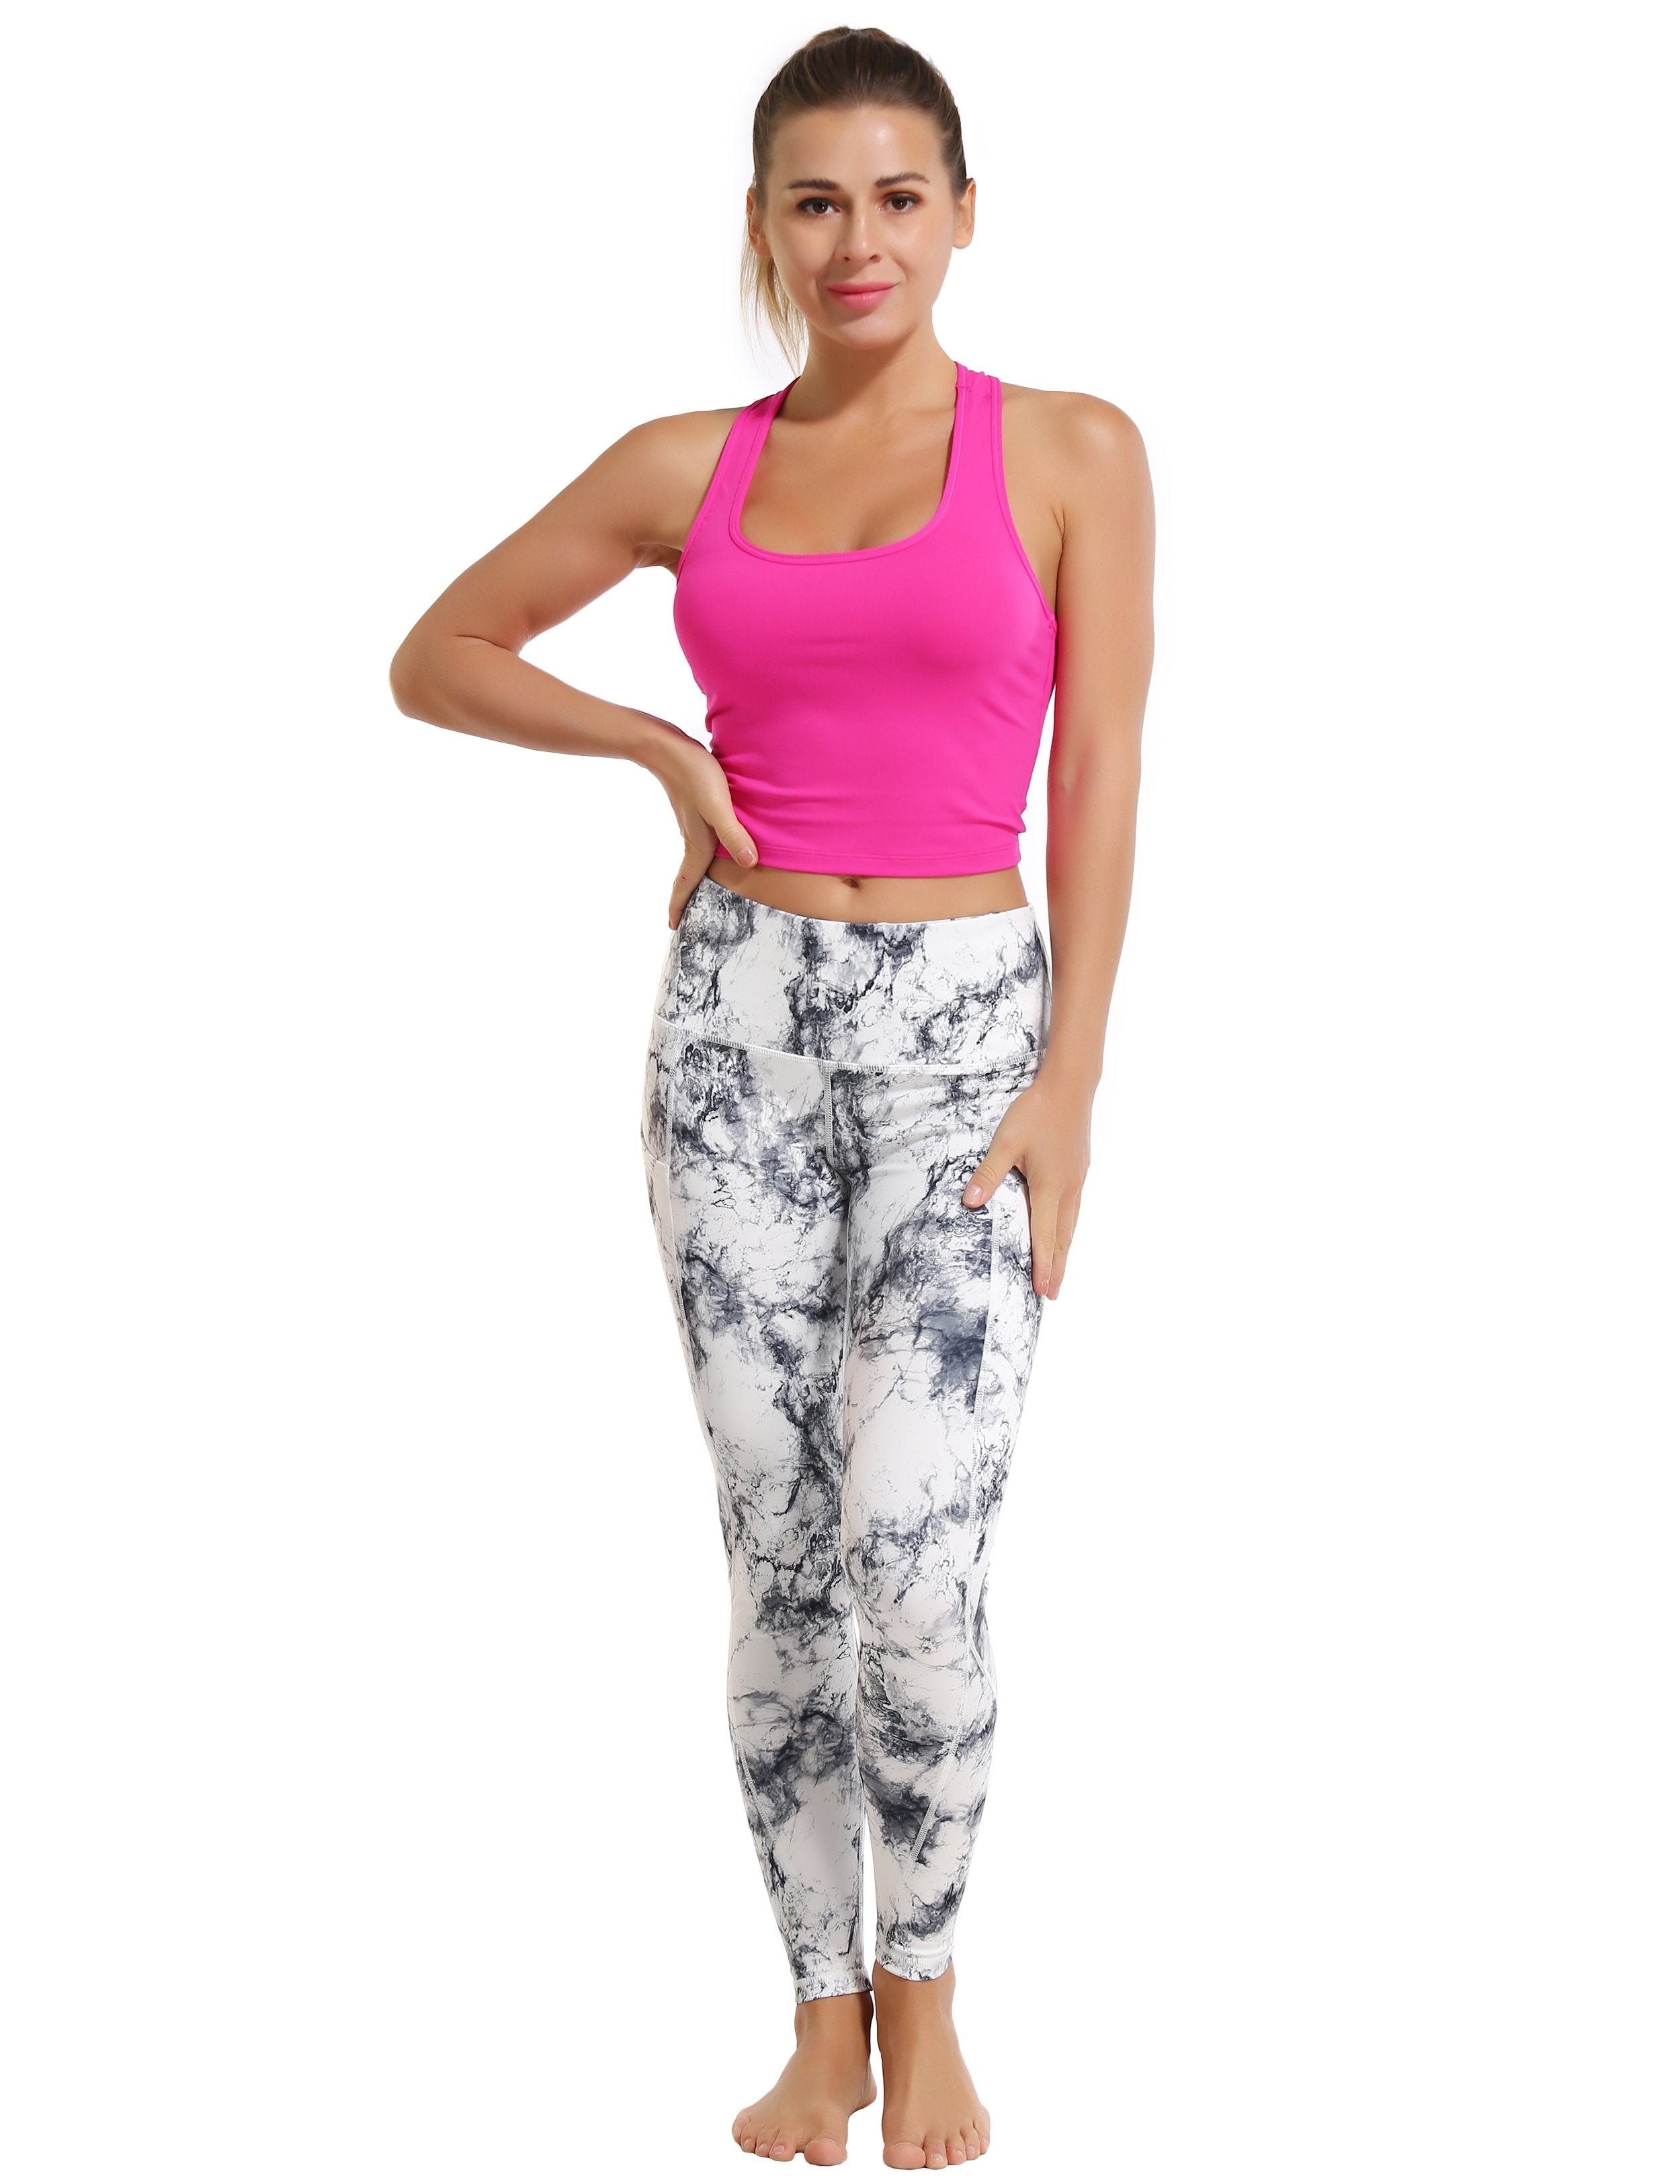 High Waist Side Pockets Running Pants arabescato 78%Polyester/22%Spandex Fabric doesn't attract lint easily 4-way stretch No see-through Moisture-wicking Tummy control Inner pocket